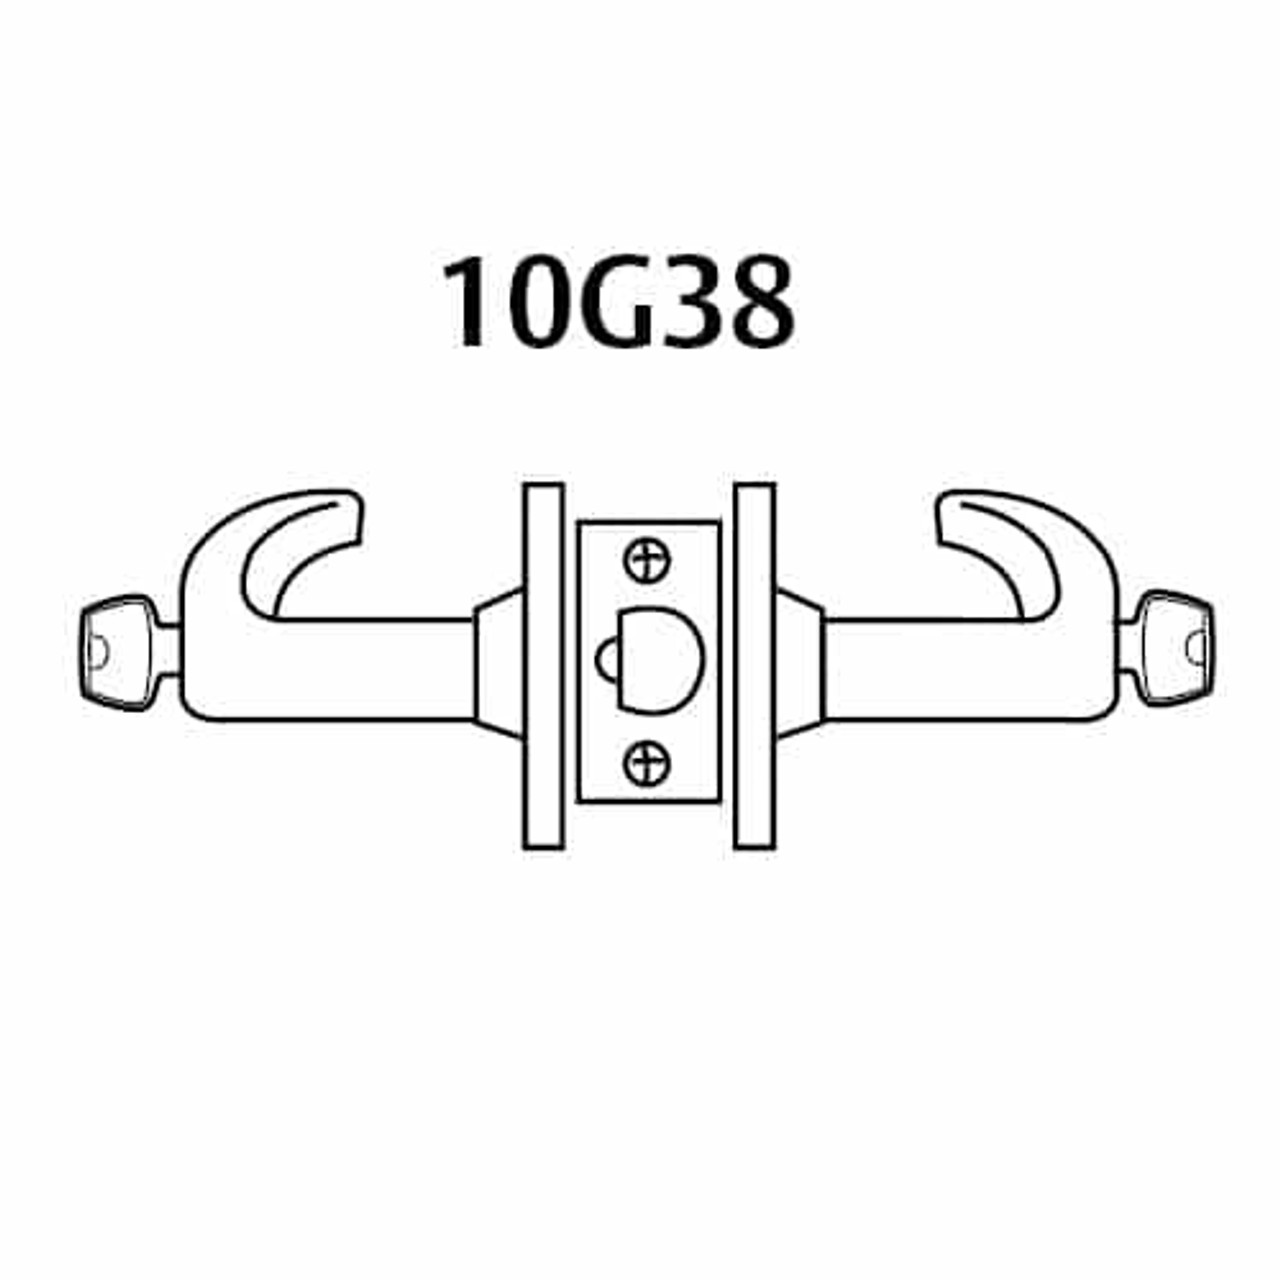 2870-10G38-LL-26D Sargent 10 Line Cylindrical Classroom Locks with L Lever Design and L Rose Prepped for SFIC in Satin Chrome